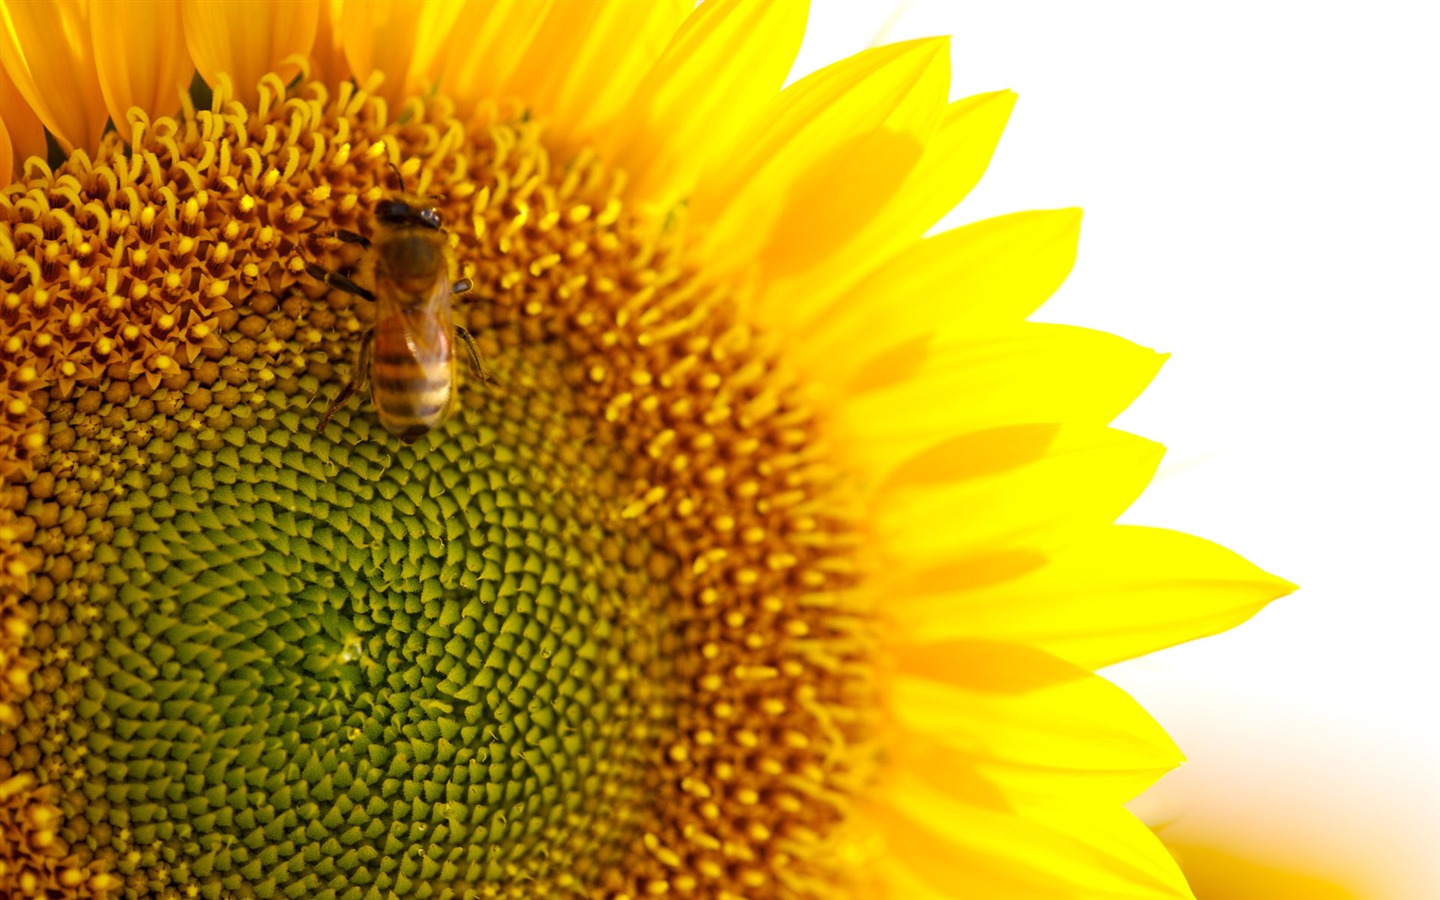 Sunny sunflower photo HD Wallpapers #33 - 1440x900